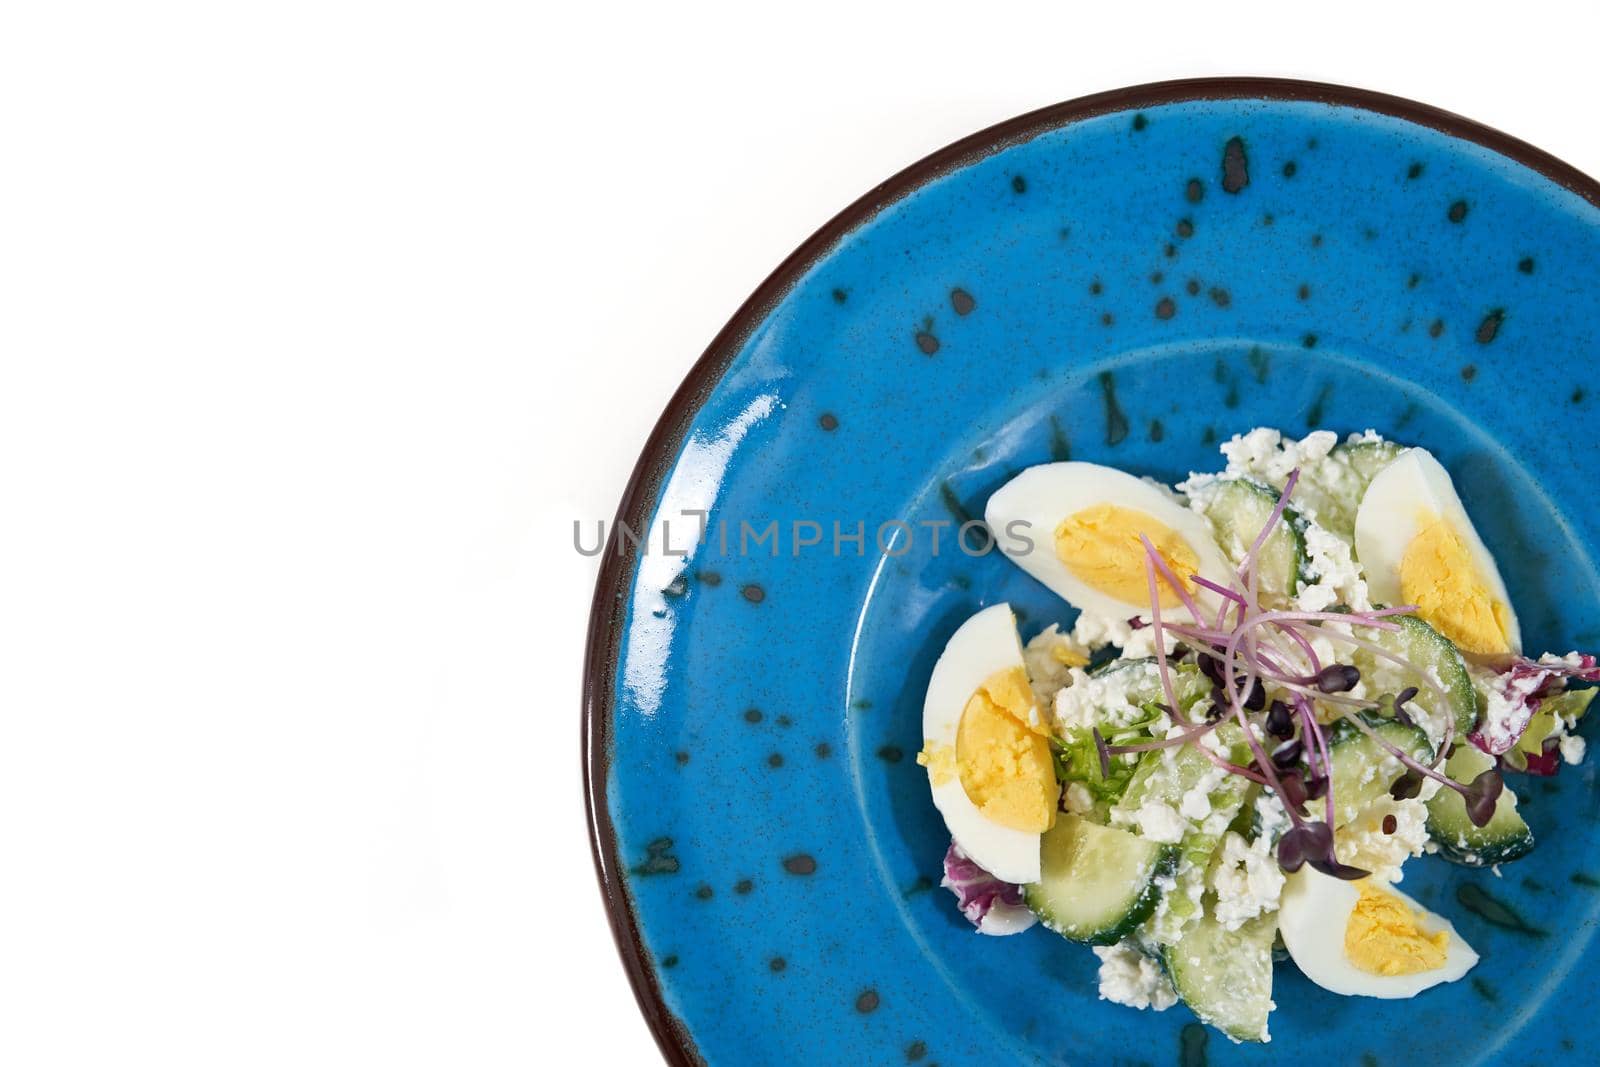 Top view close up of modern beautiful blue plate with tasty salad eggs,cucumber,cottage cheese and fresh greens. Concept of tasty and healthy salad for maintain body weight.